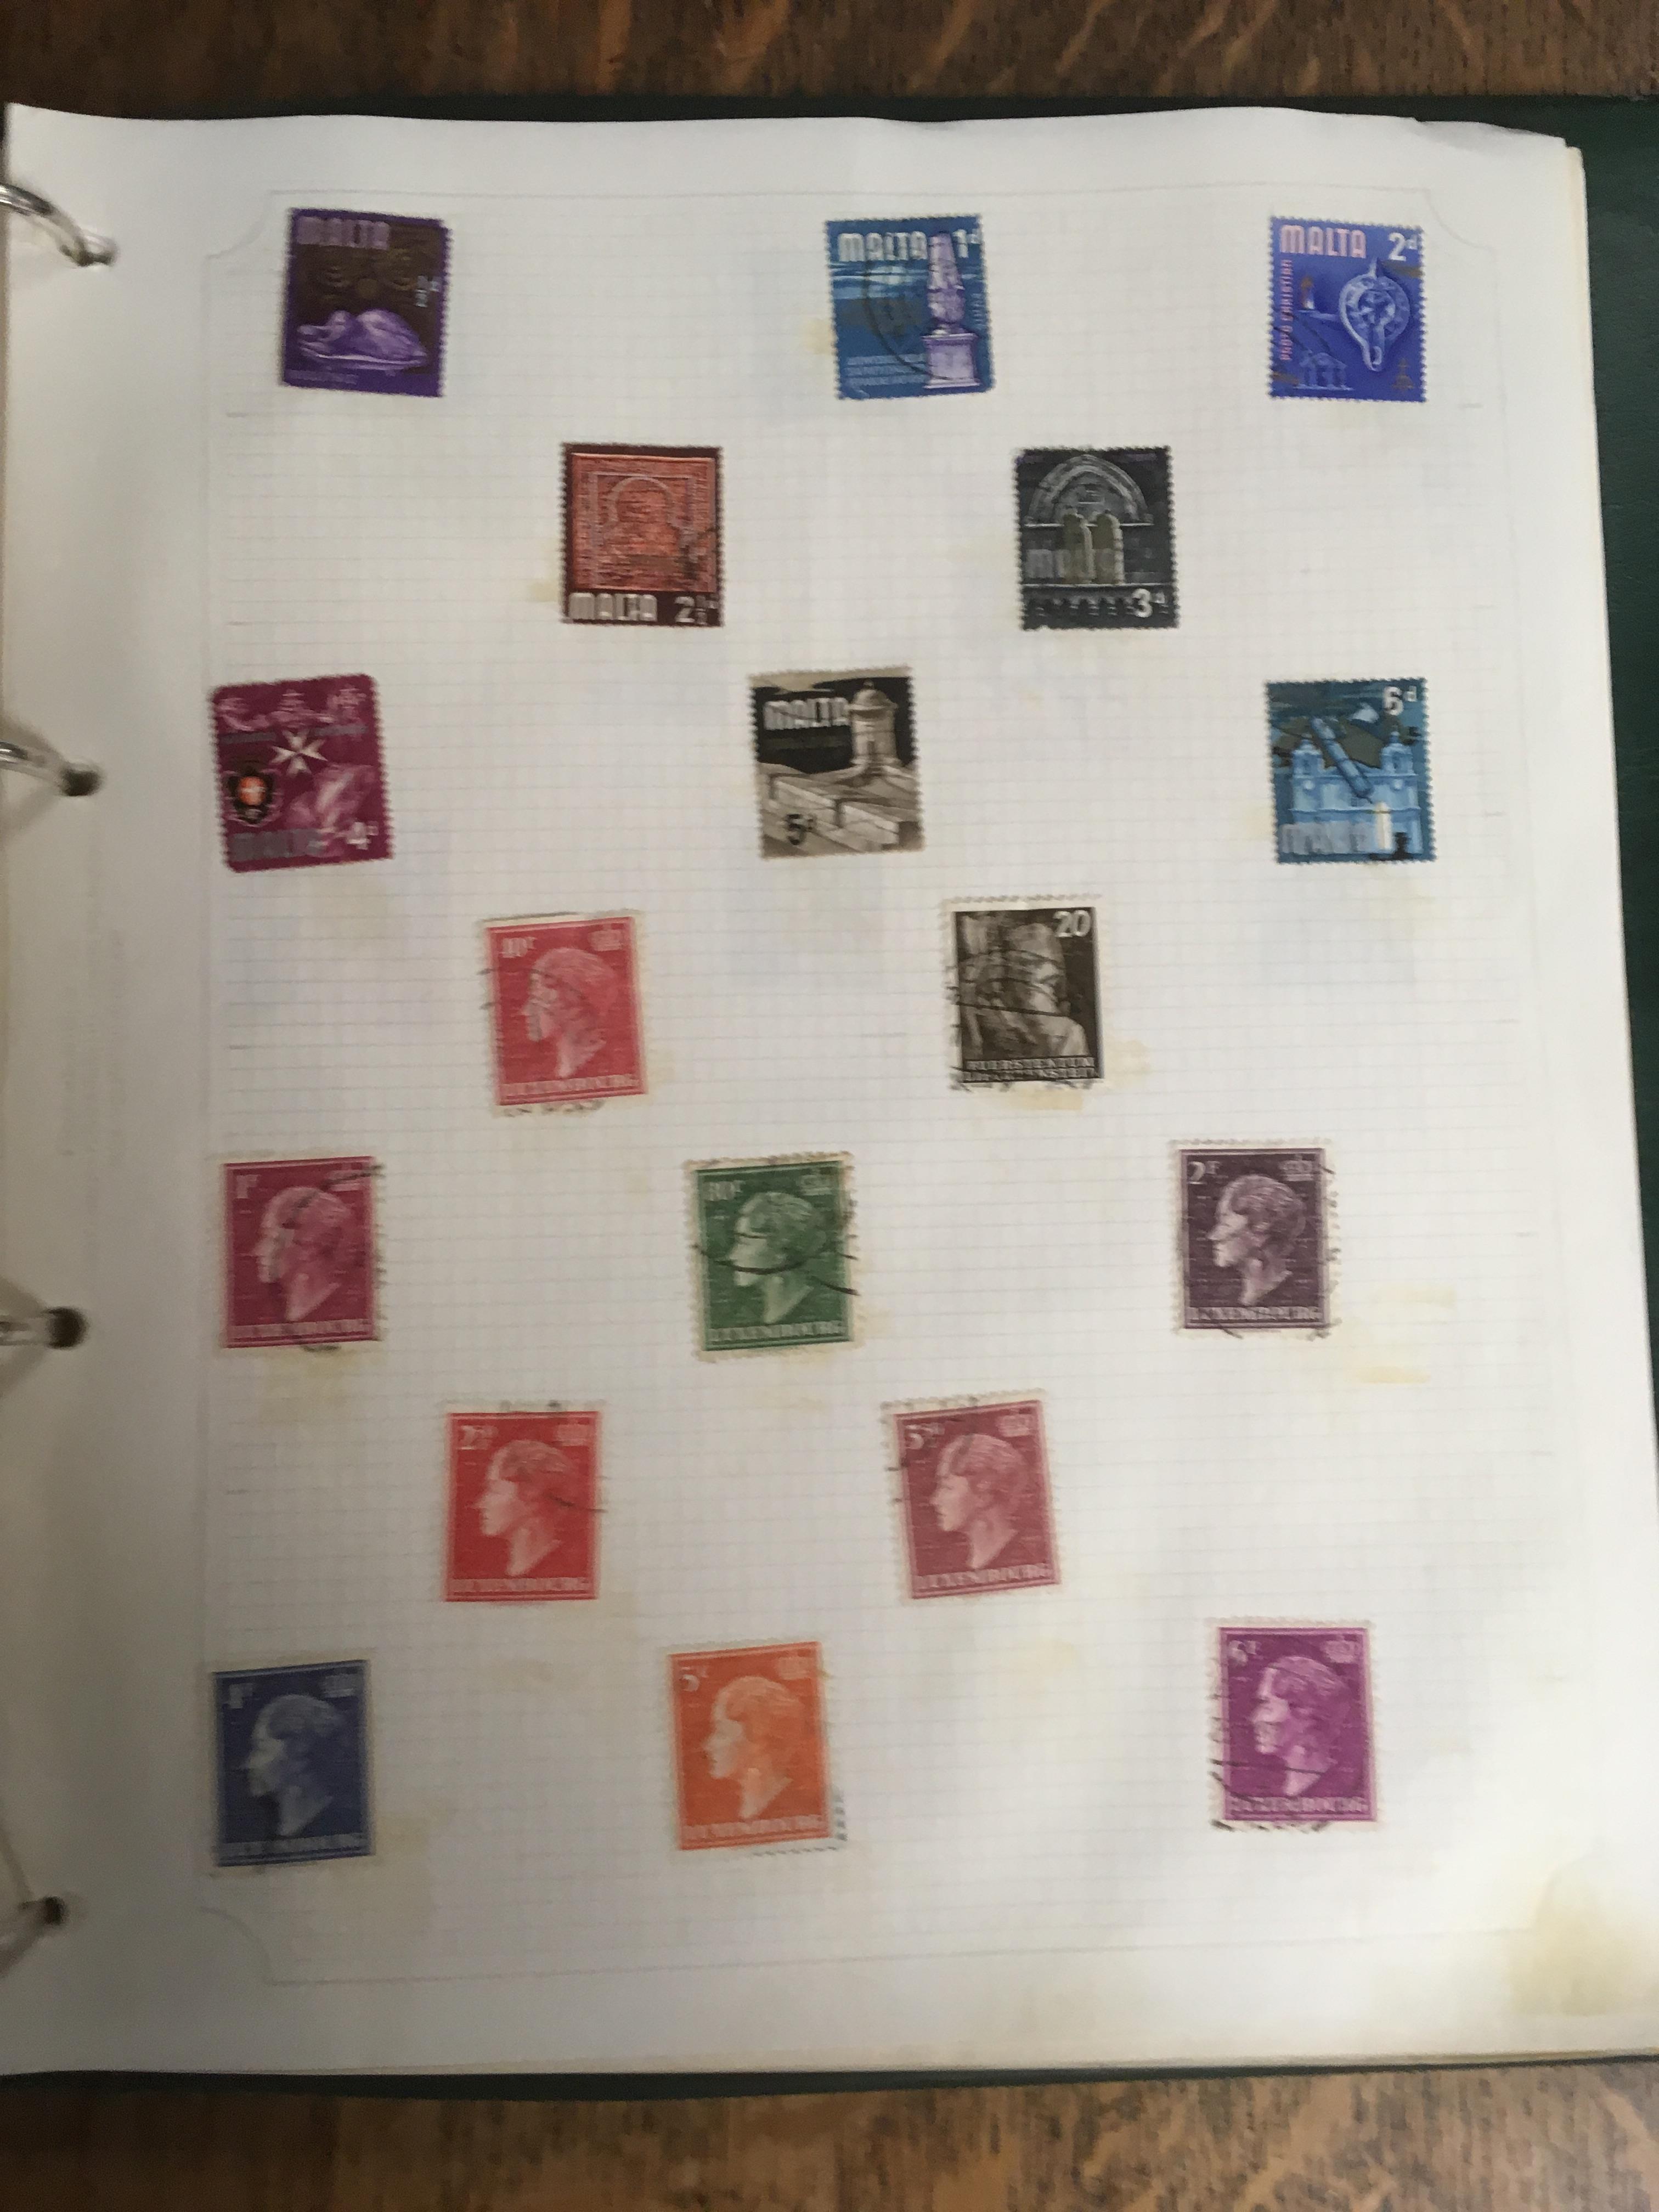 TUB WITH ALL WORLD STAMP COLLECTIONS IN TEN SG AVON ALBUMS, - Image 4 of 5